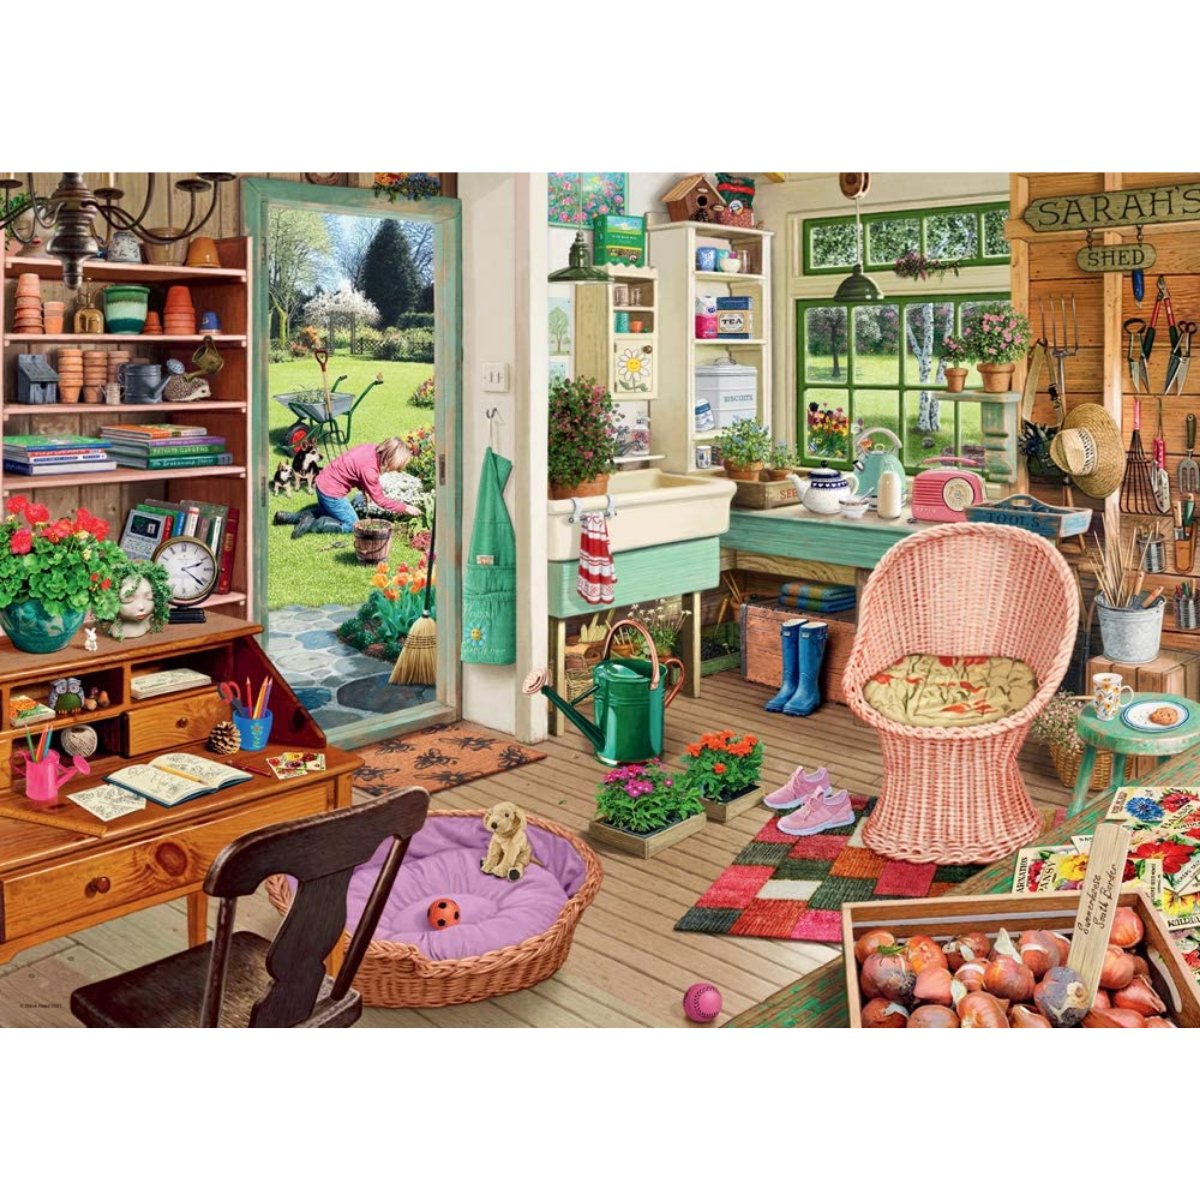 Ravensburger My Haven No 8, The Garden Shed Jigsaw Puzzle (1000 Pieces) - Phillips Hobbies